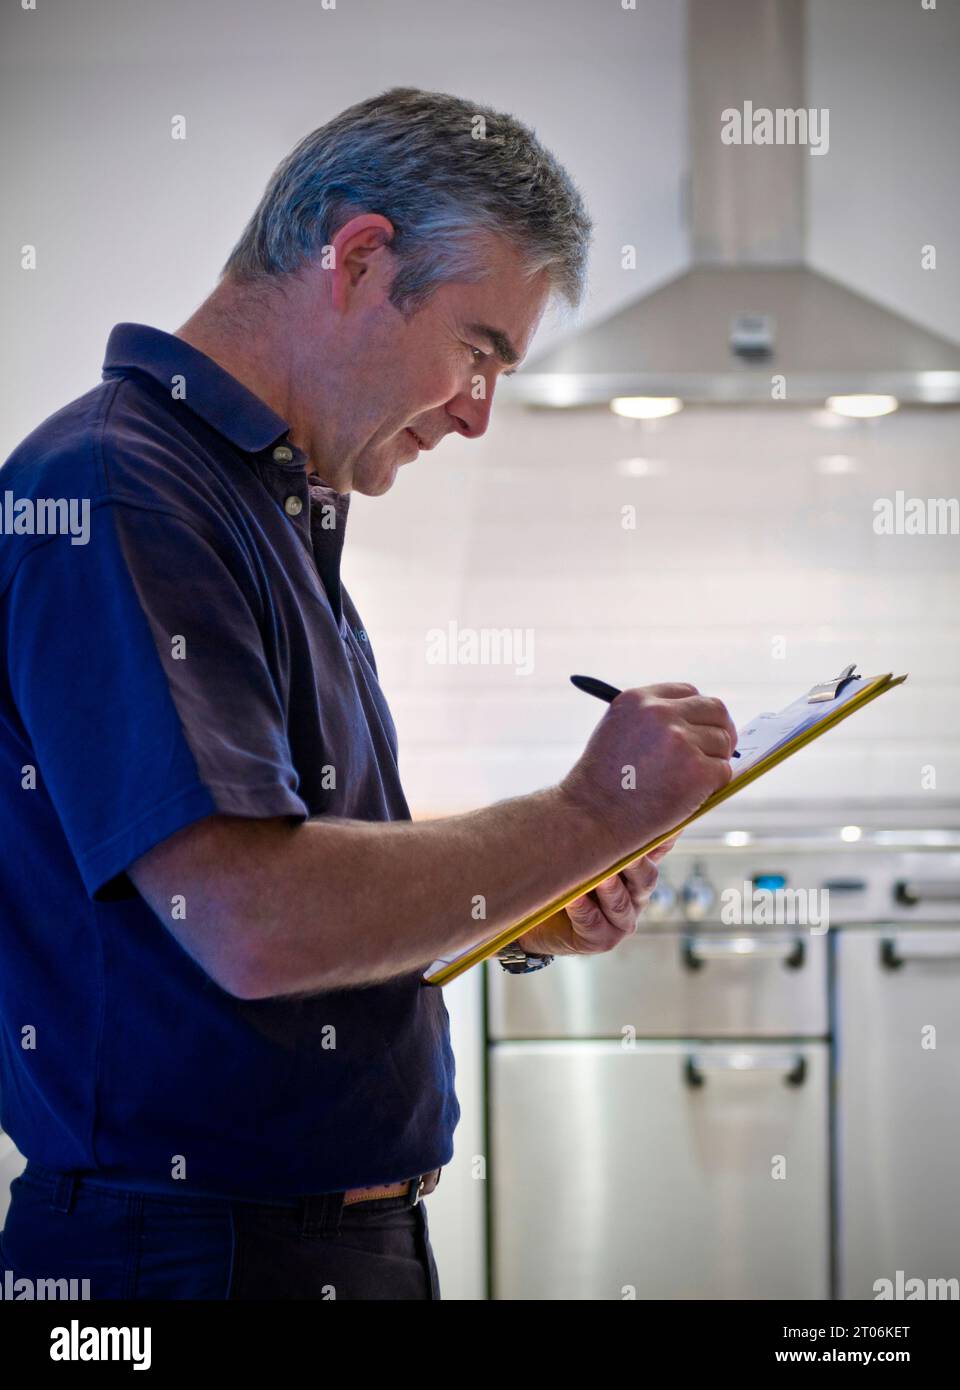 Man clipboard carbon emissions survey property related sales design maintenance refurbishment quotation person, in contemporary domestic kitchen UK Stock Photo